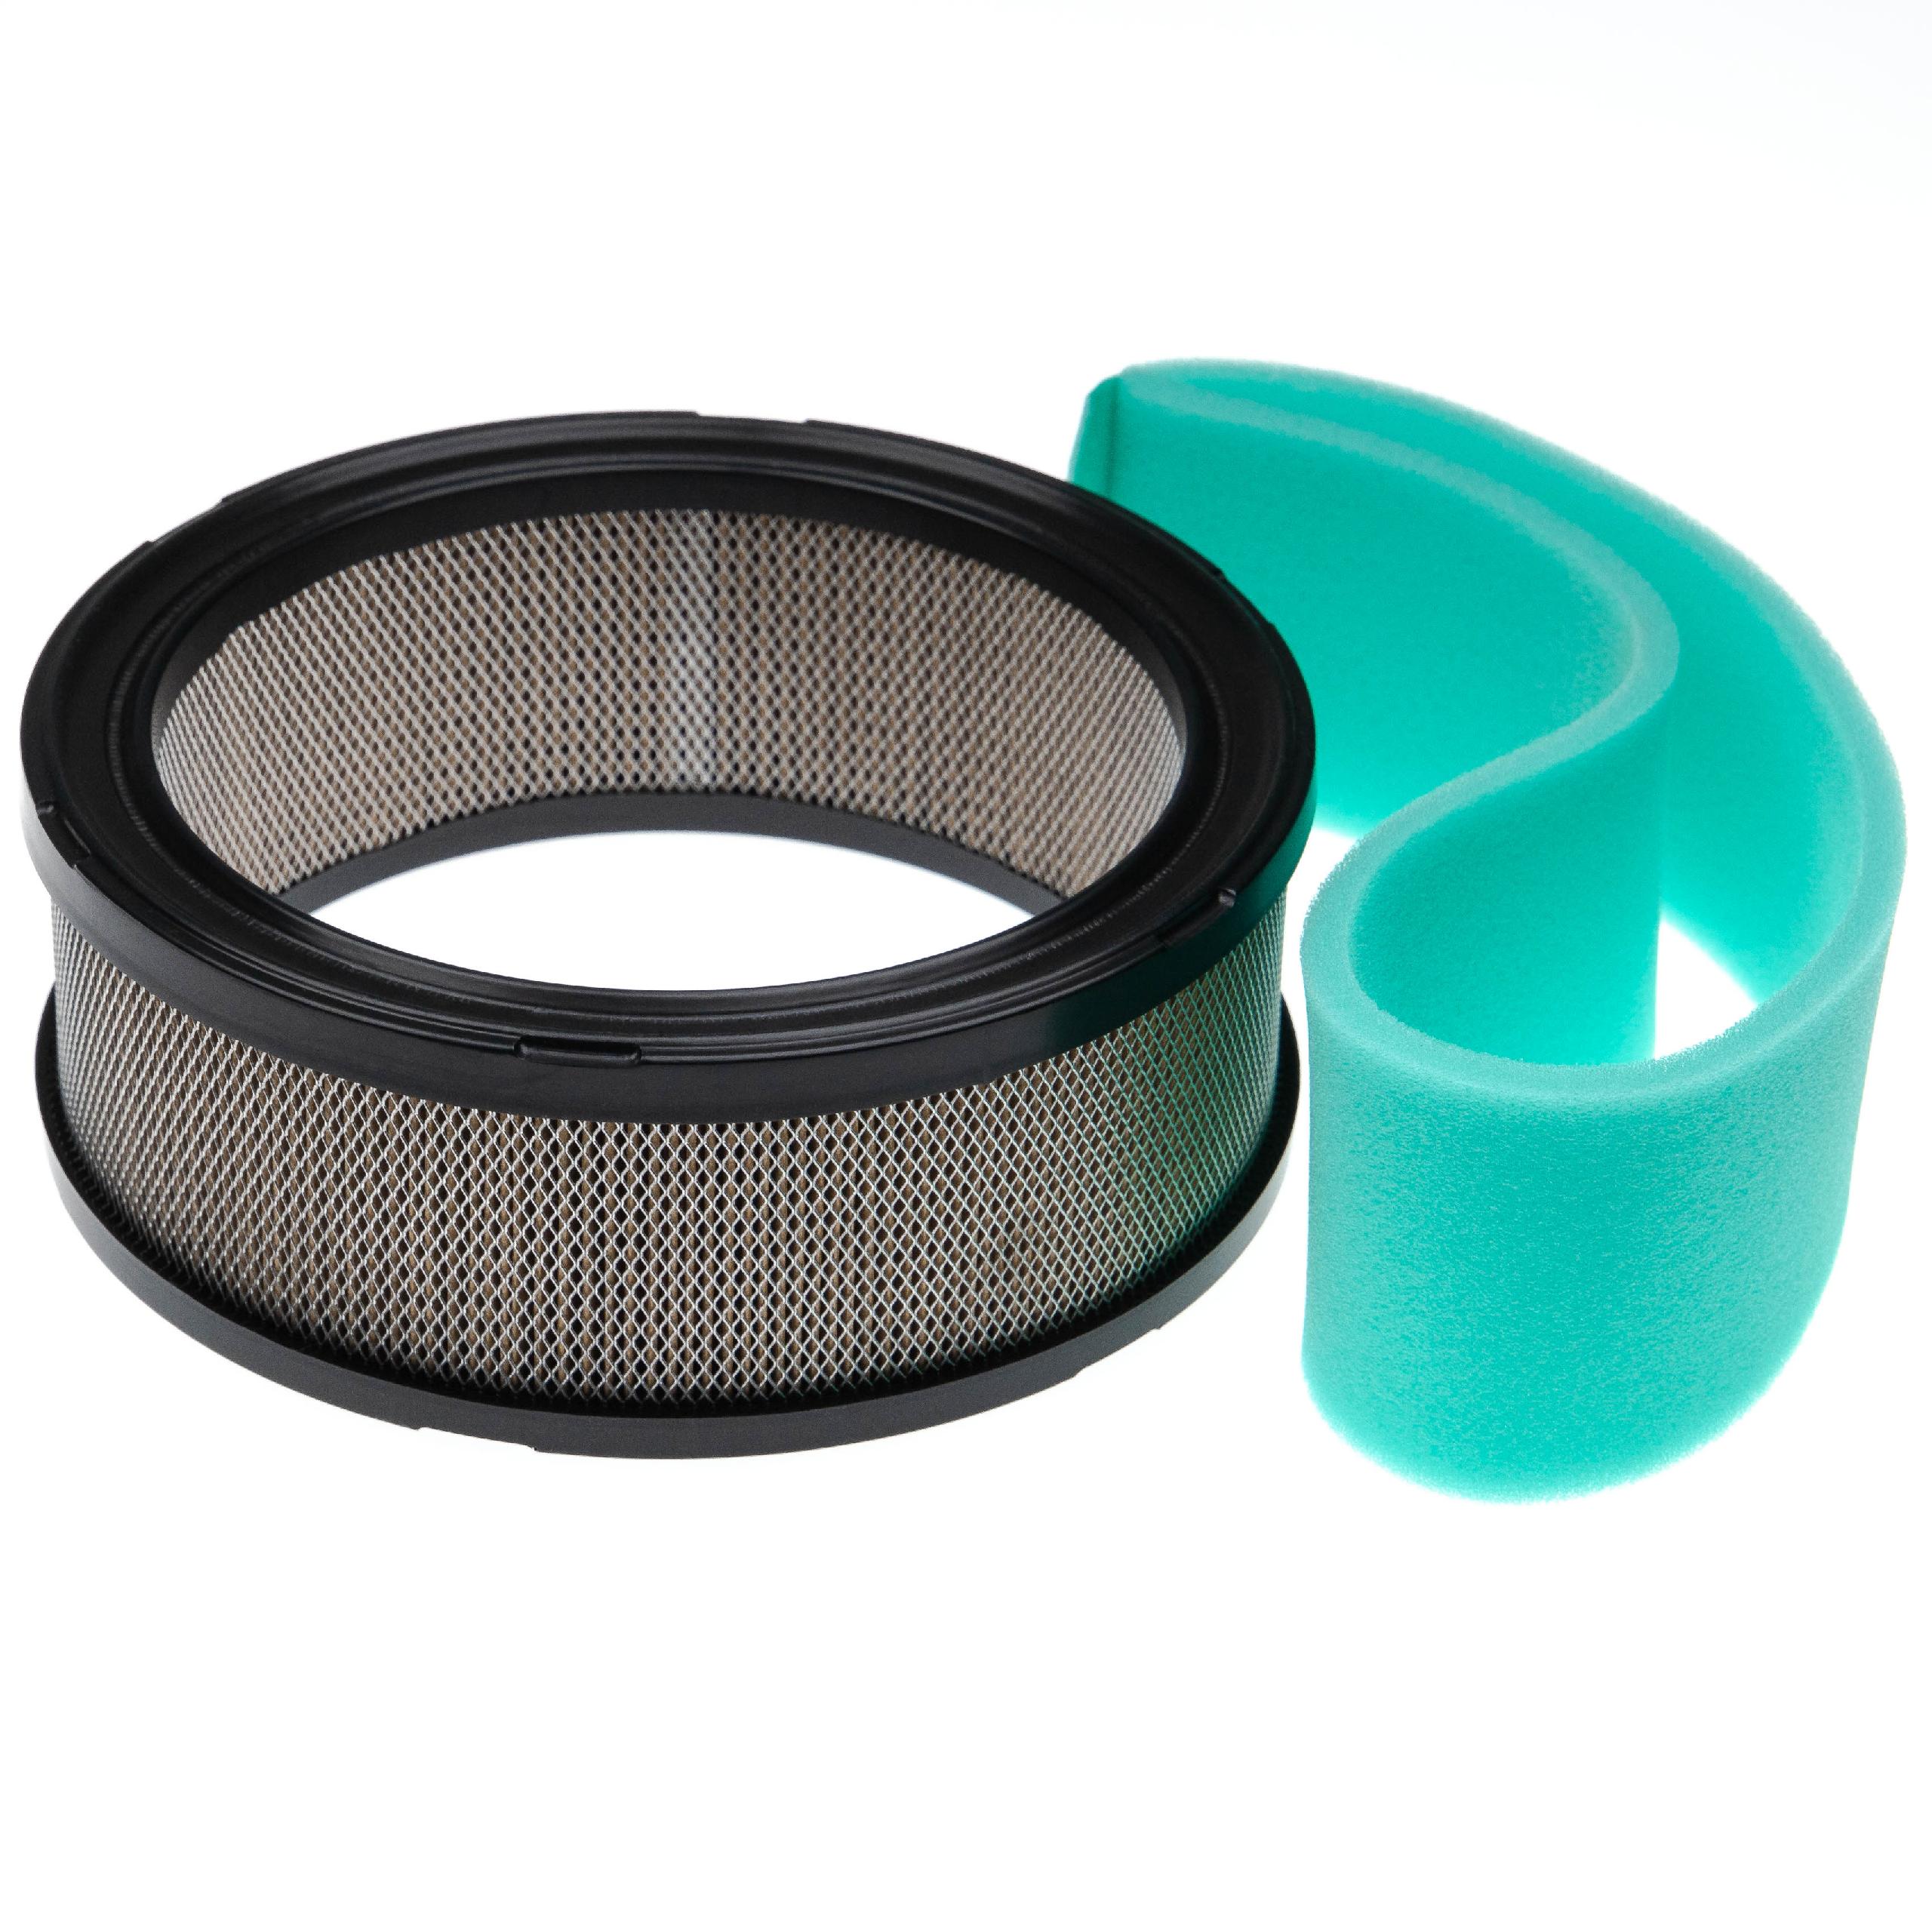 2x Filter as Replacement for Ariens 21530800 - Filter Set (1x air filter, 1x pre-filter)